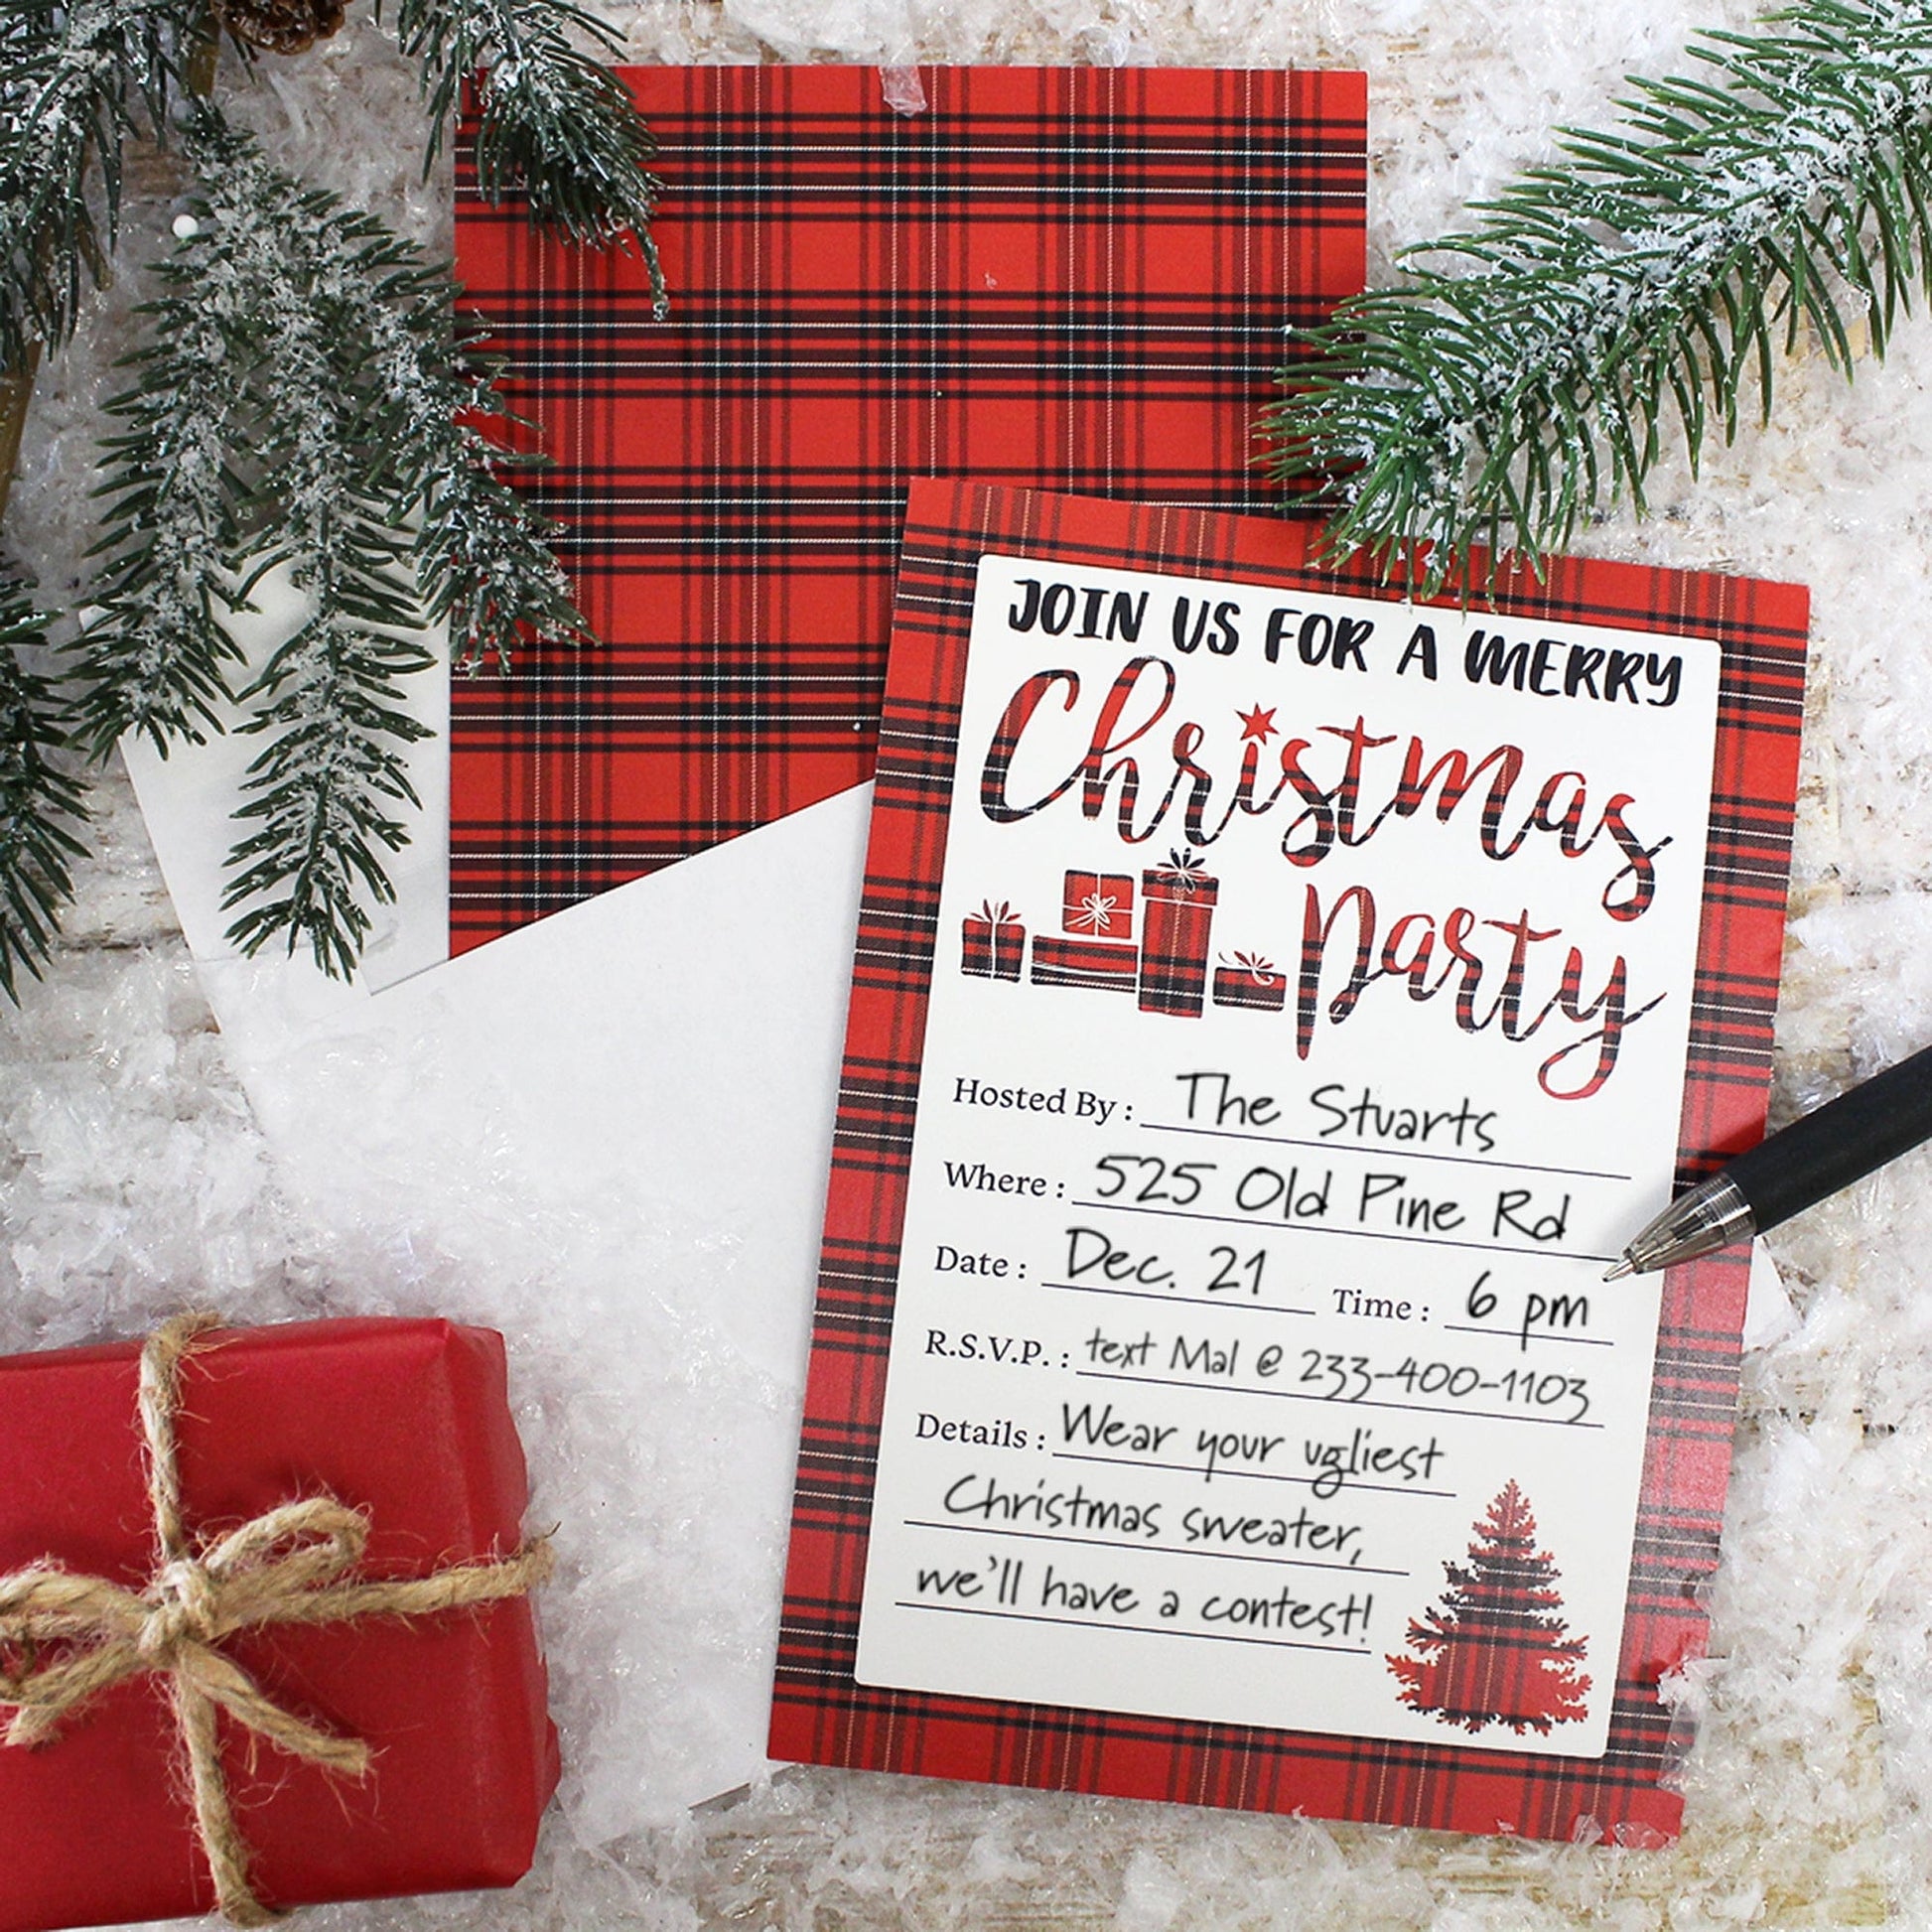 Plaid Christmas Party Invitations - 12 Cards with Envelopes